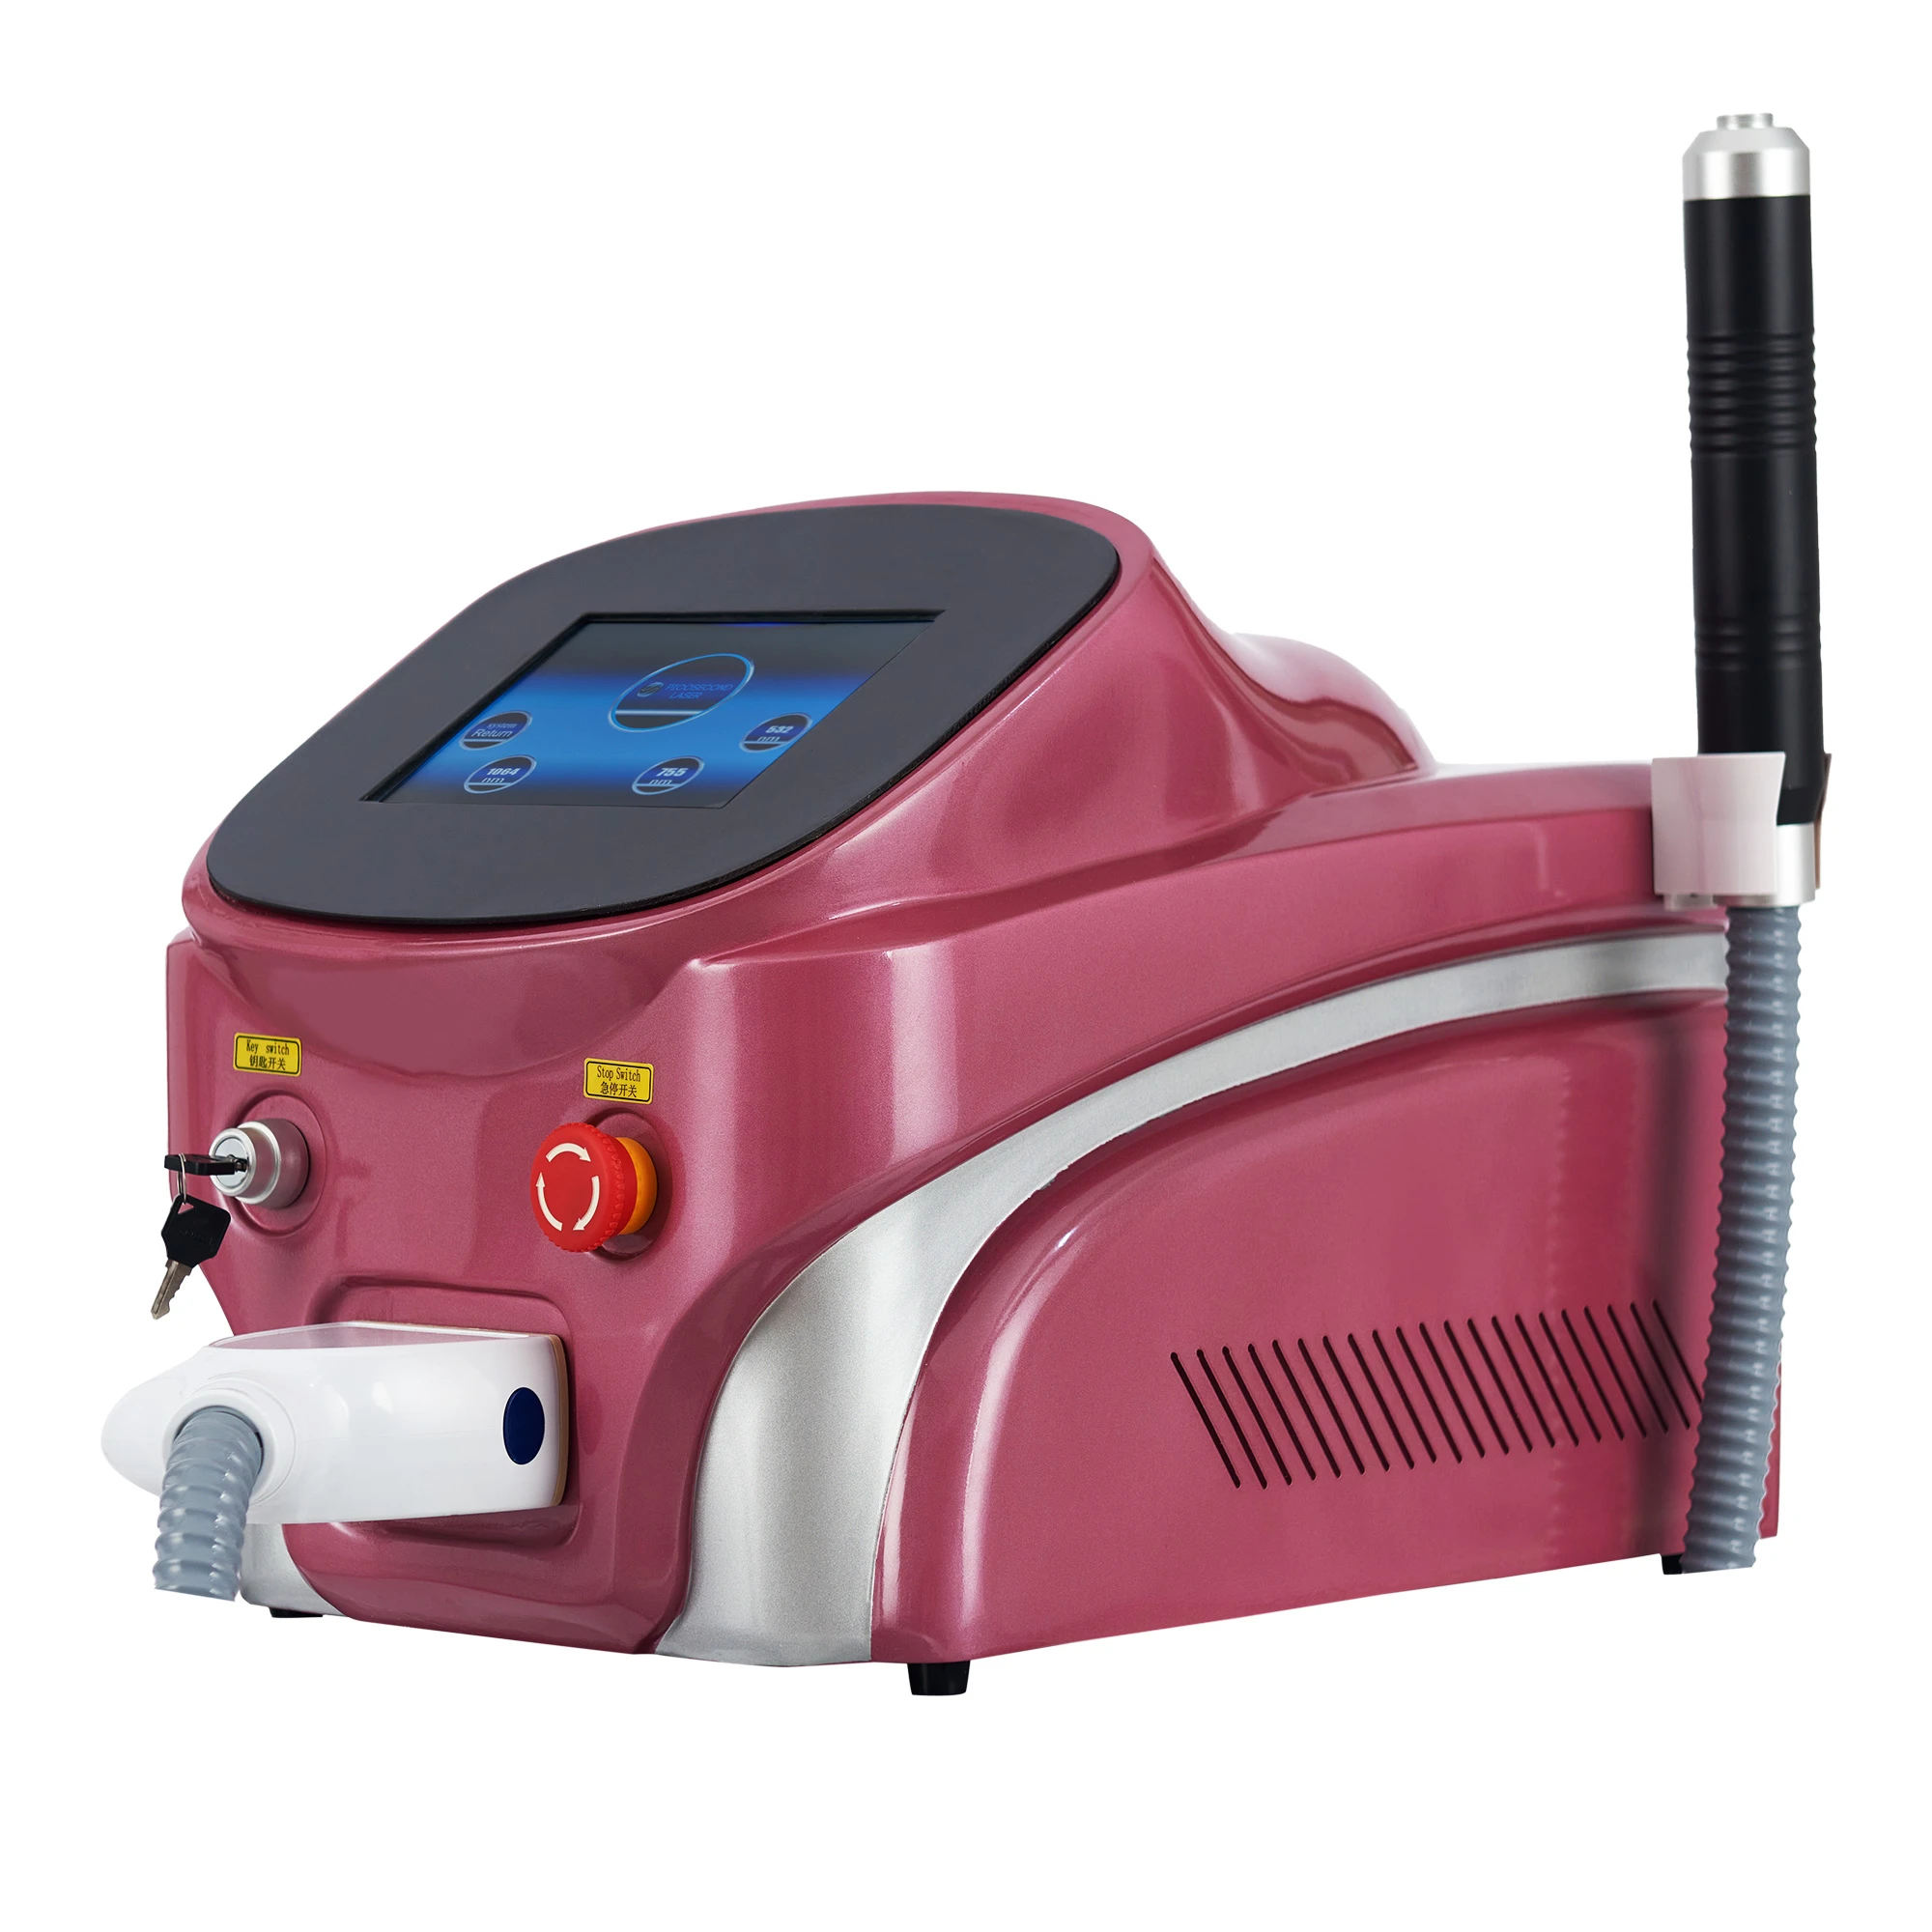 Portable Picosecond Laser for Complete Tattoo Removal